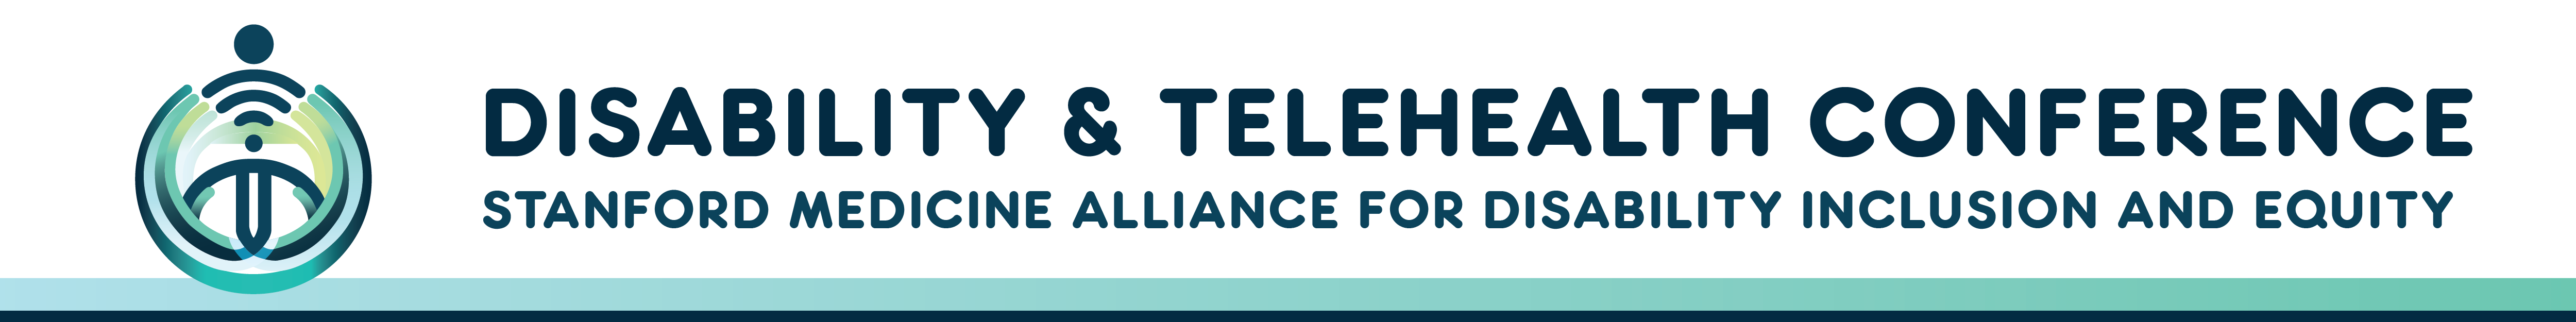 Disability & Telehealth Conference Banner